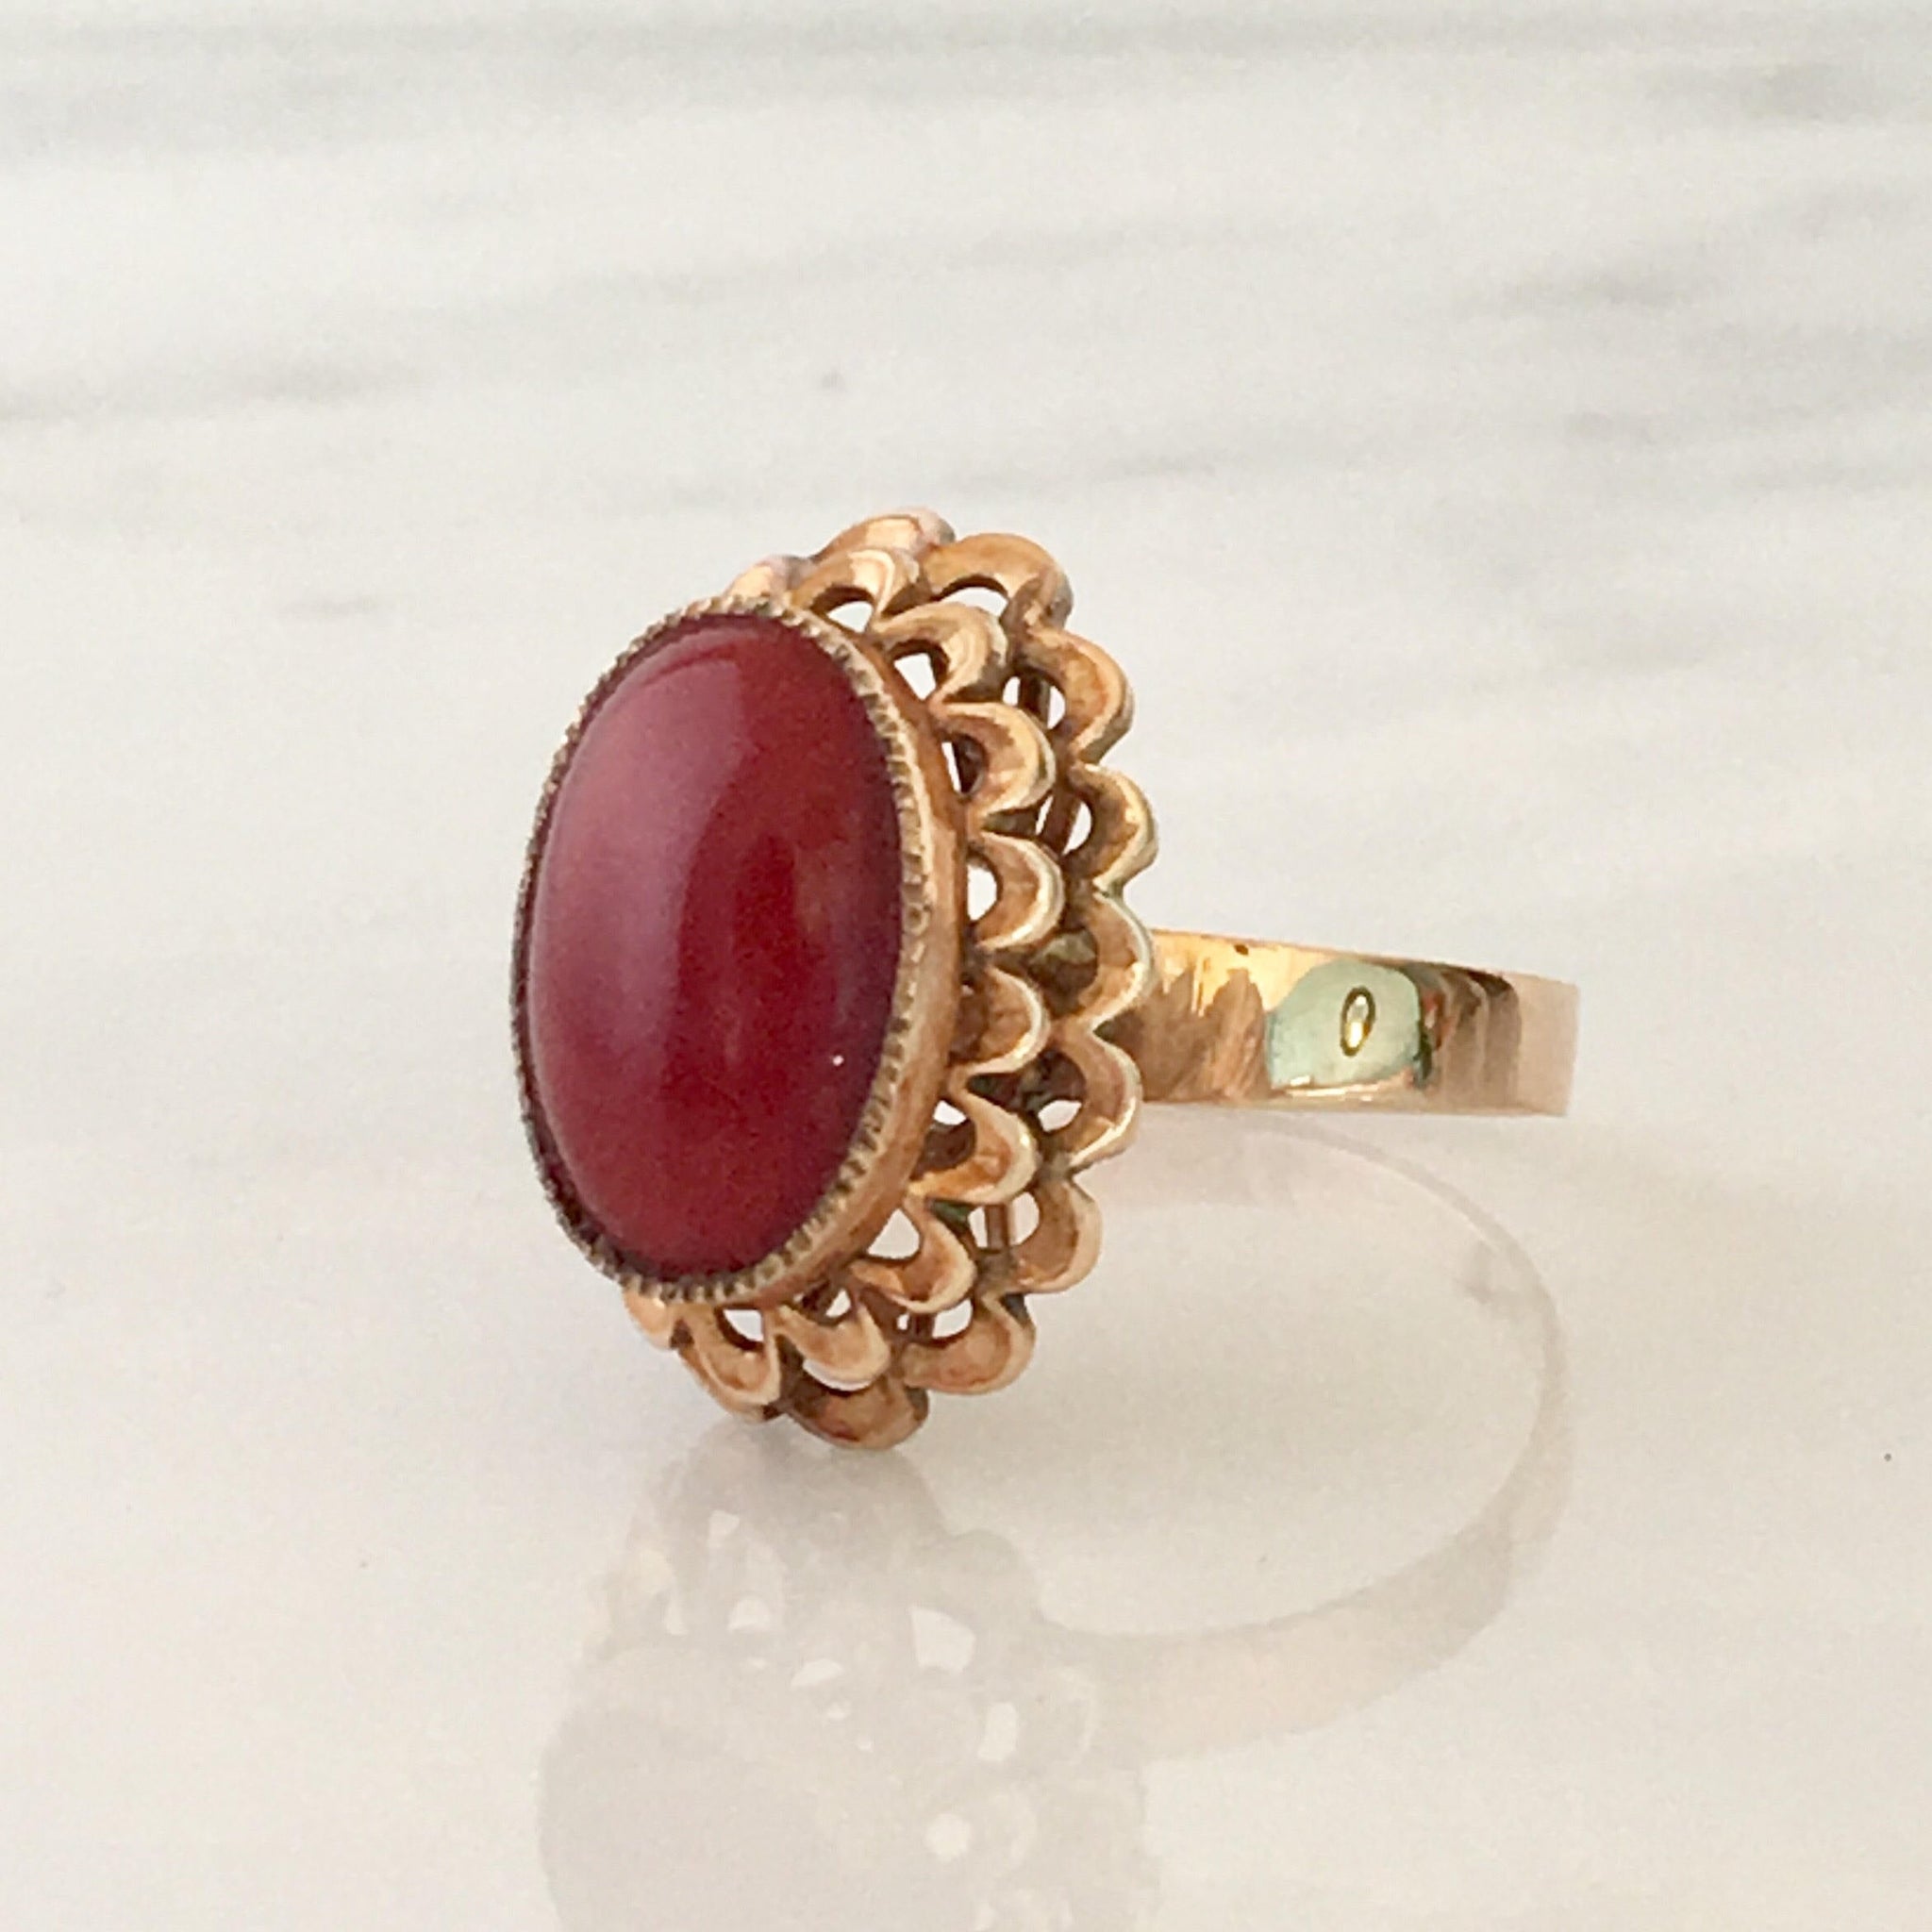 235-GR6297 - 22K Gold Ring For Men With Red Stone | 22k gold ring, Rings  for men, Red stone